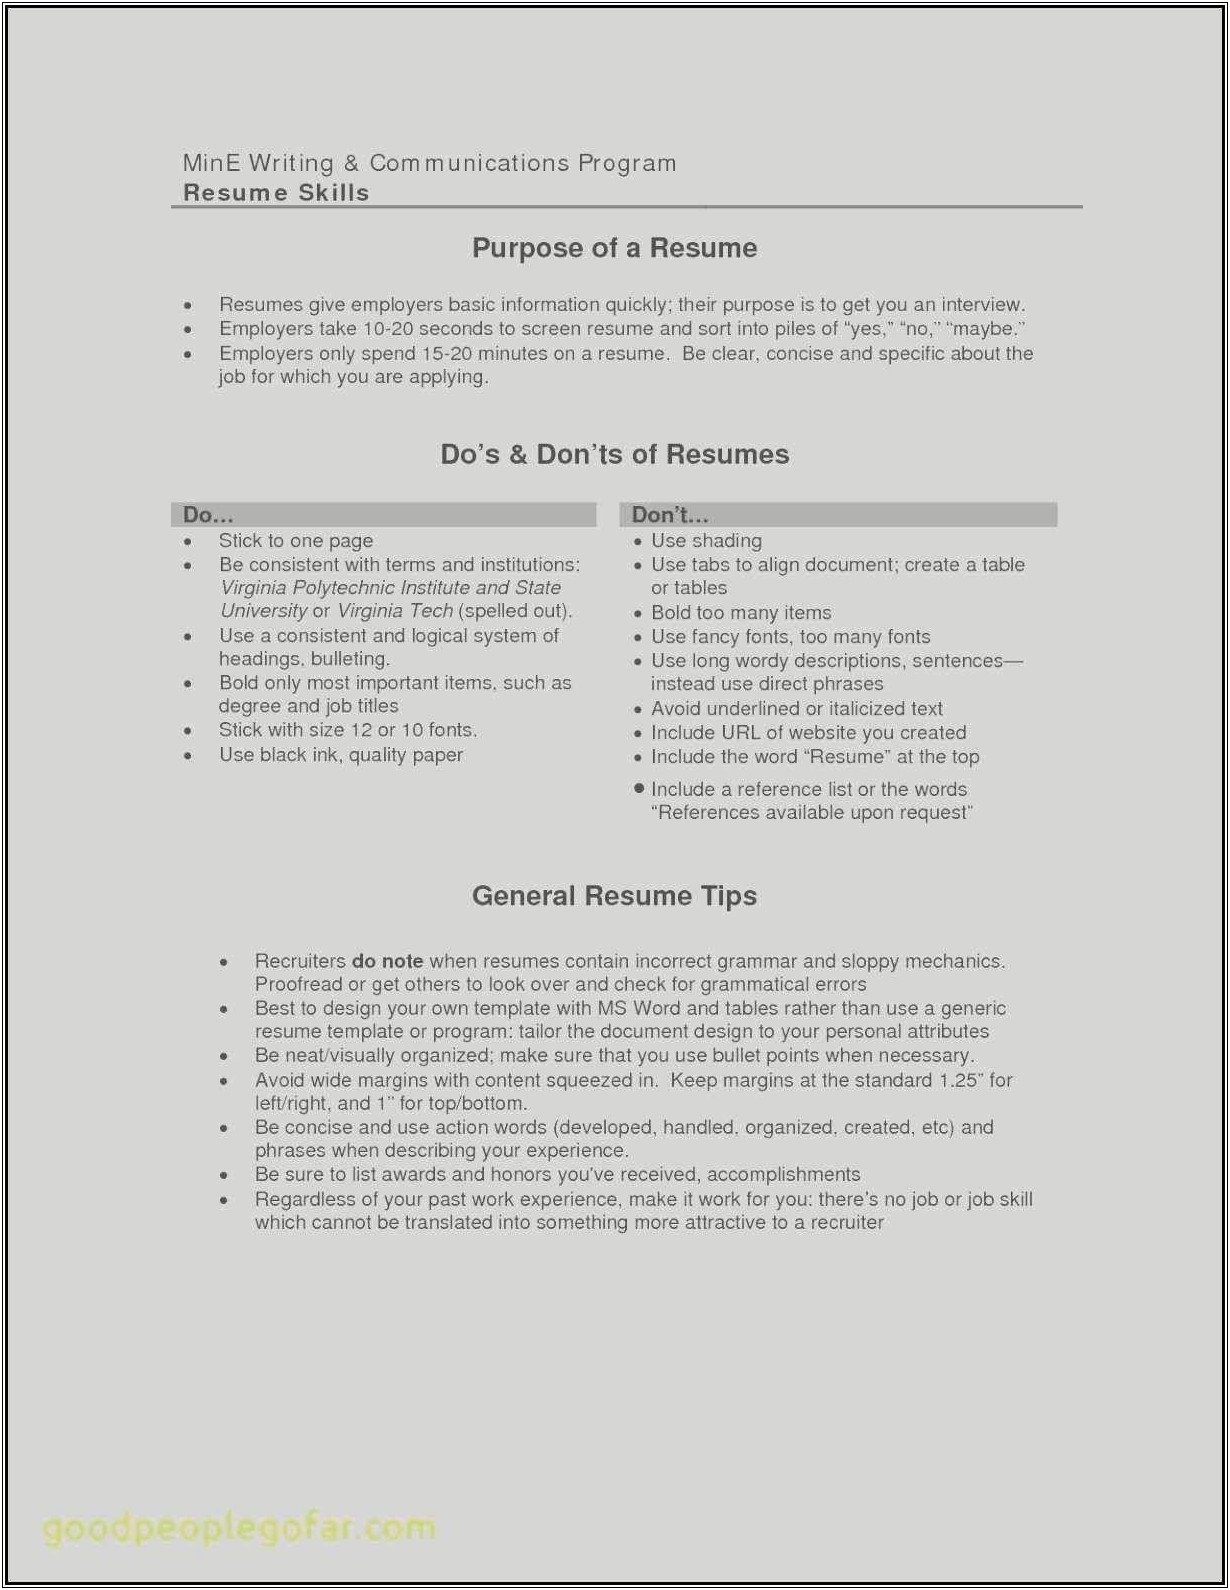 Resume Sample References Available Upon Request